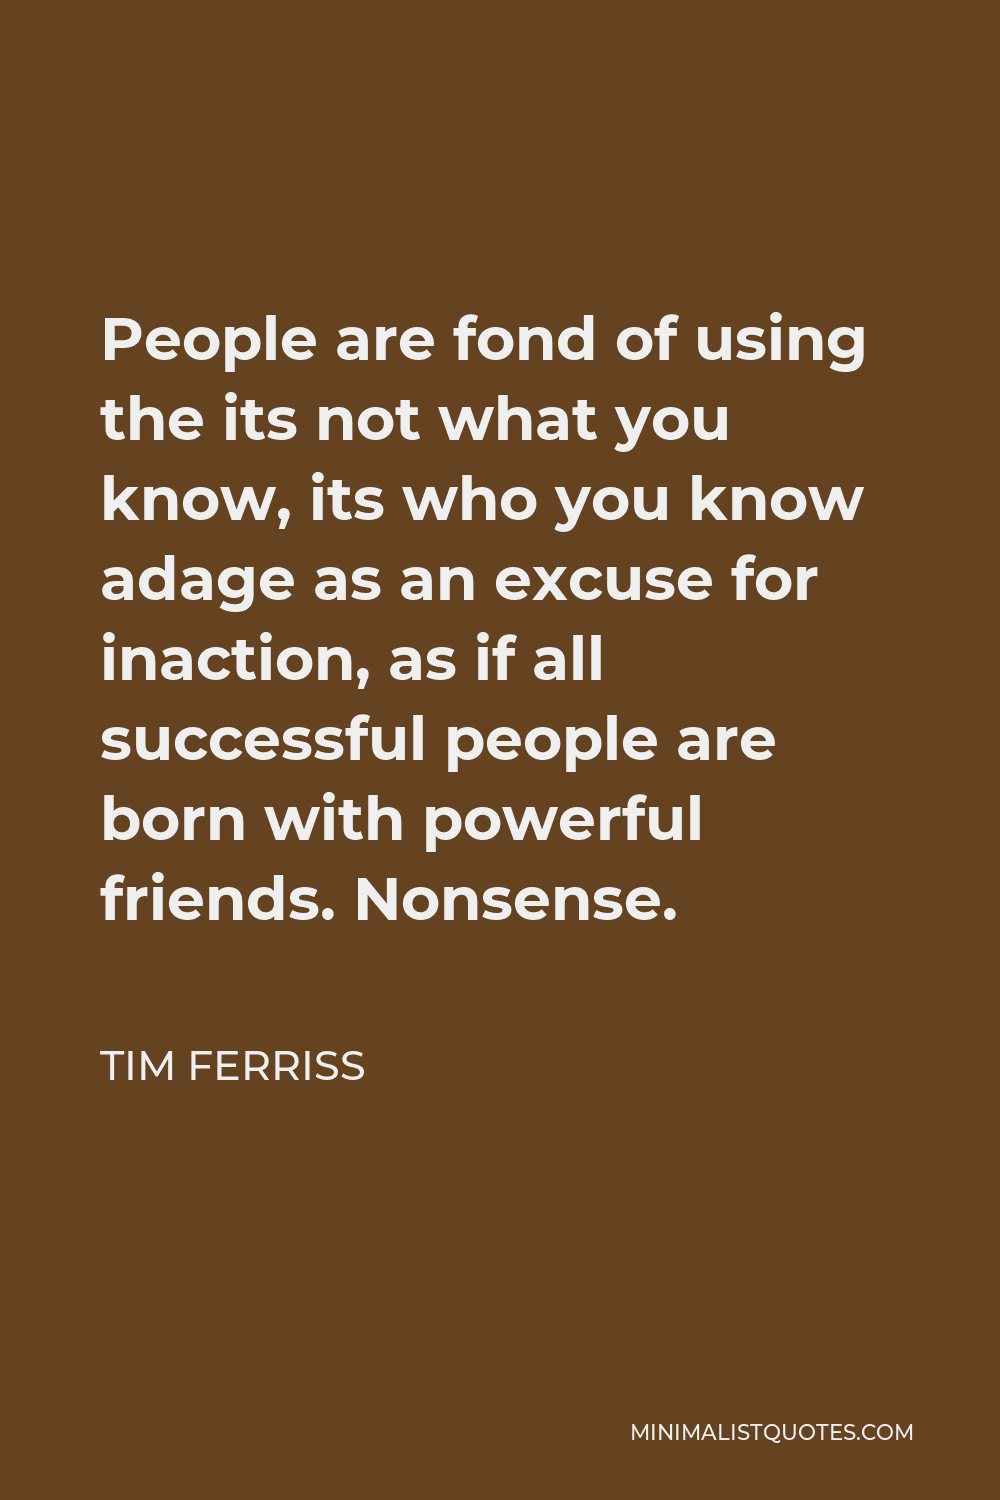 Tim Ferriss Quote - People are fond of using the its not what you know, its who you know adage as an excuse for inaction, as if all successful people are born with powerful friends. Nonsense.